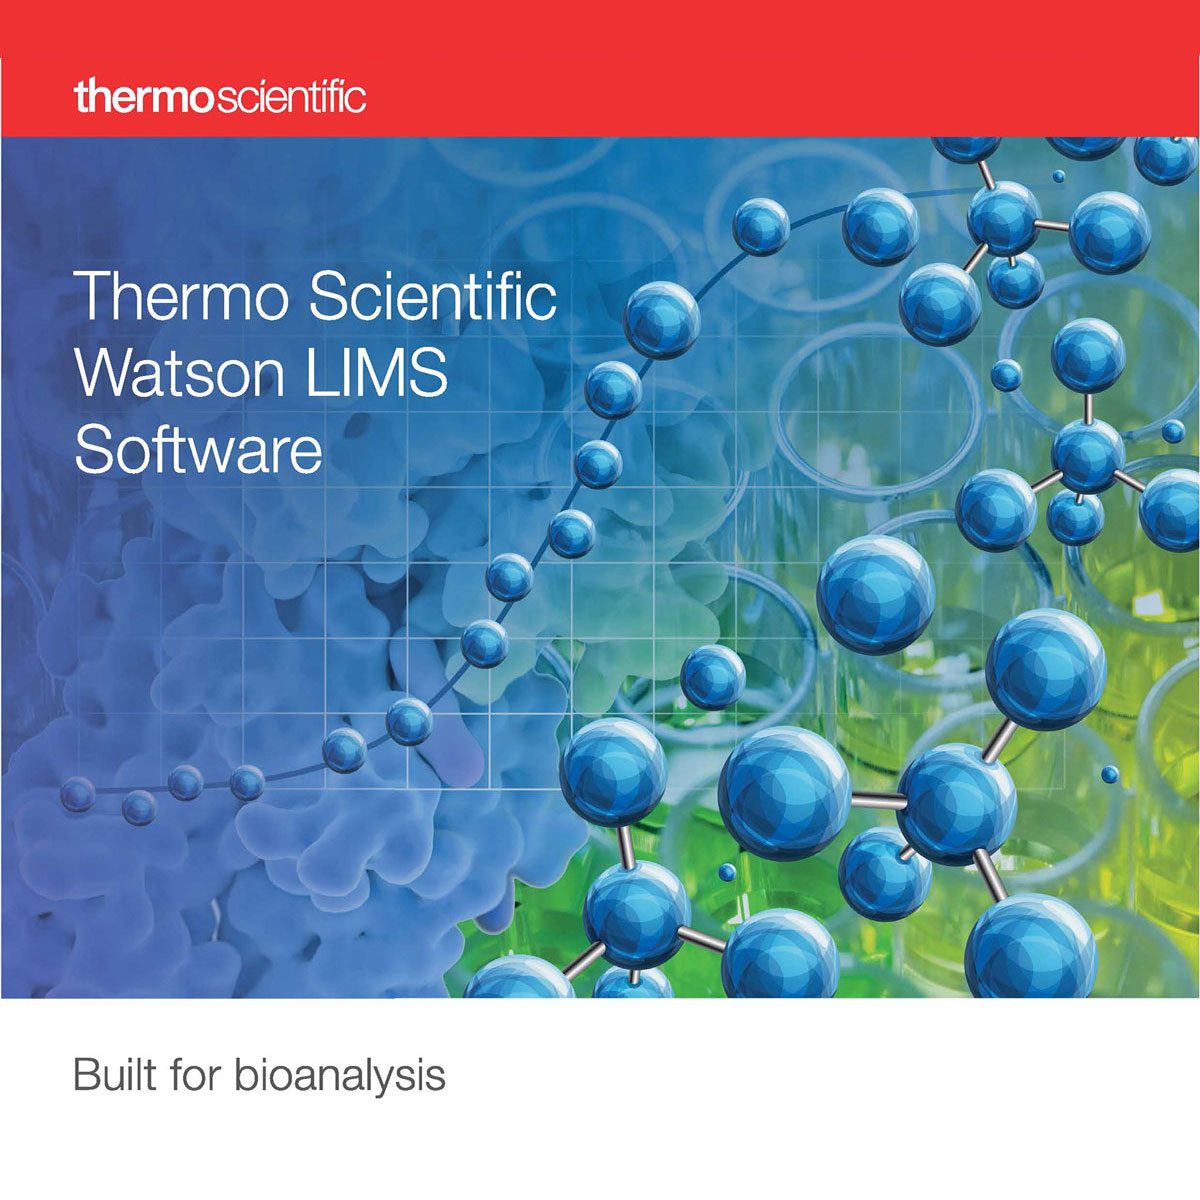 thermo scientific watson LIMS software